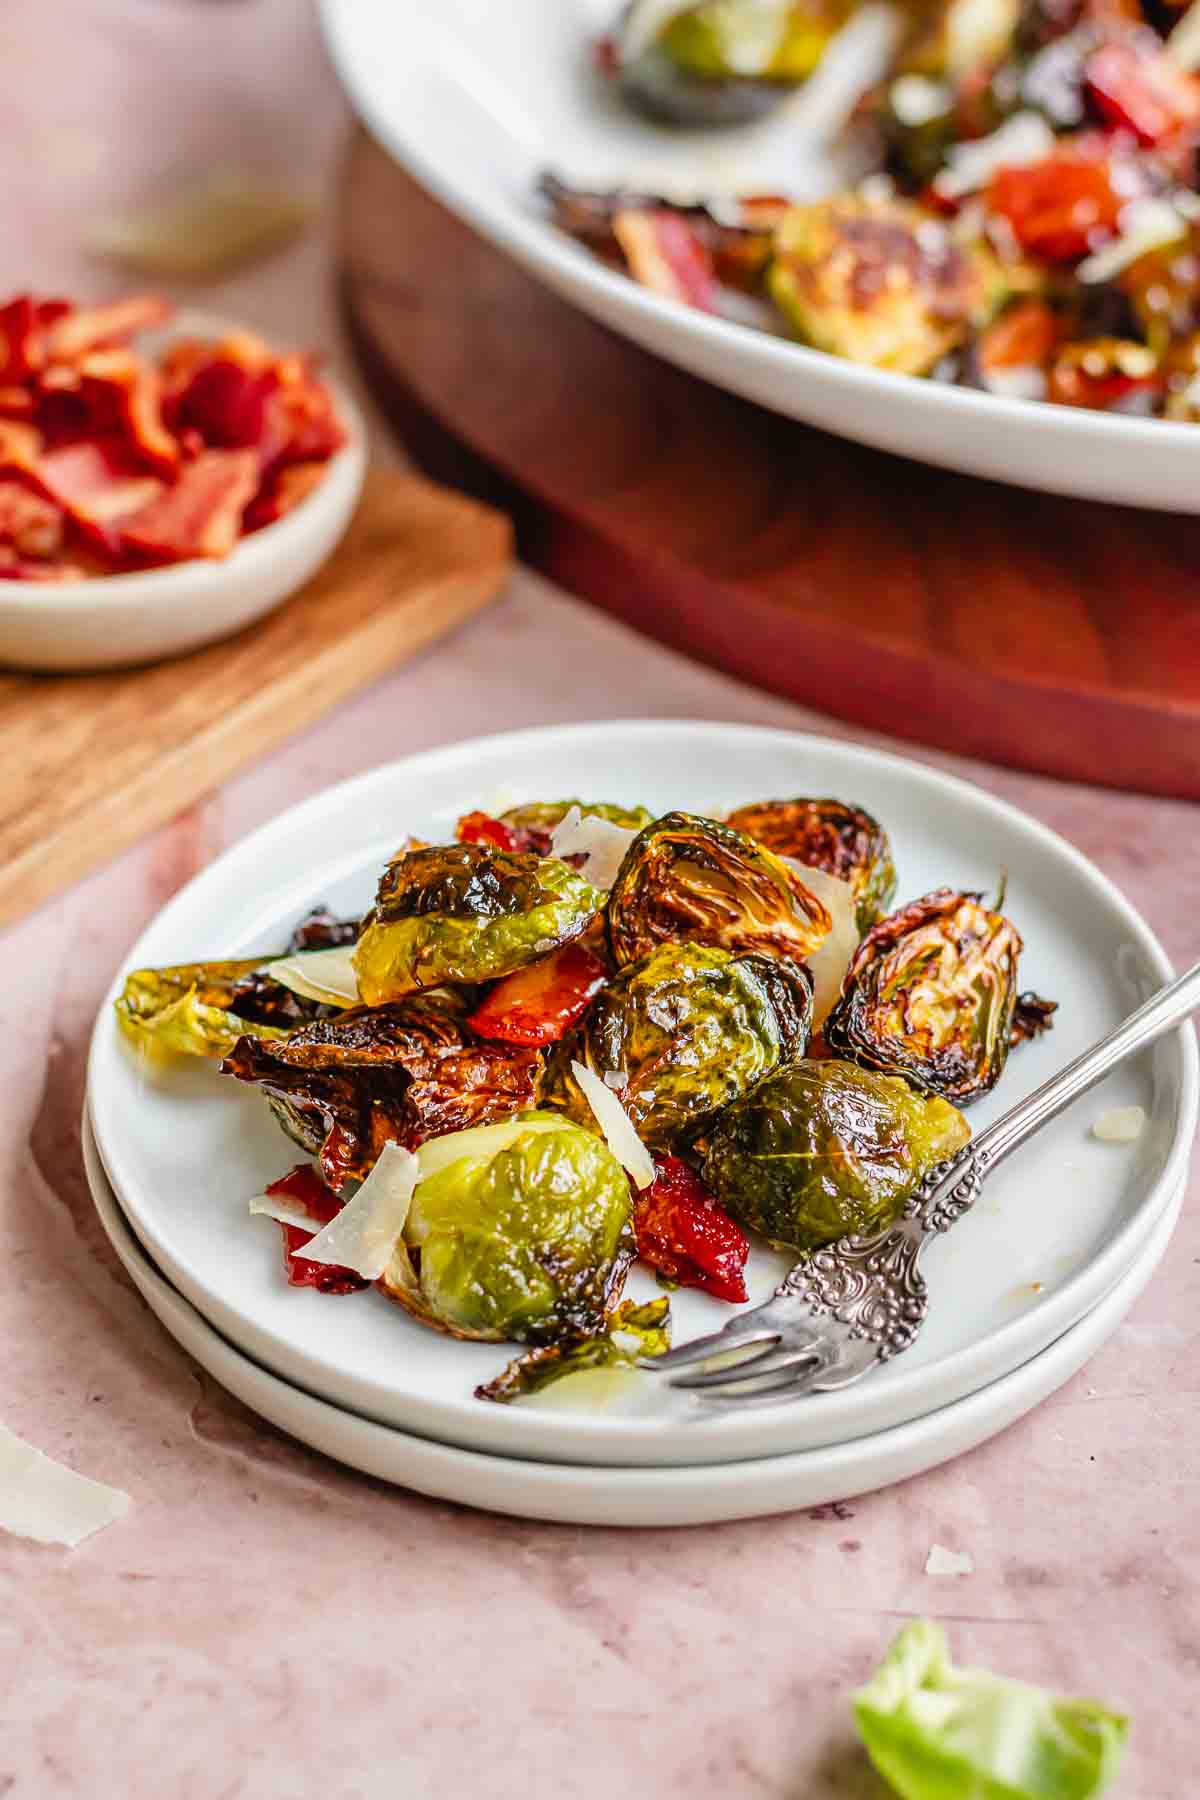 Maple bacon brussels sprouts on a plate with a fork.